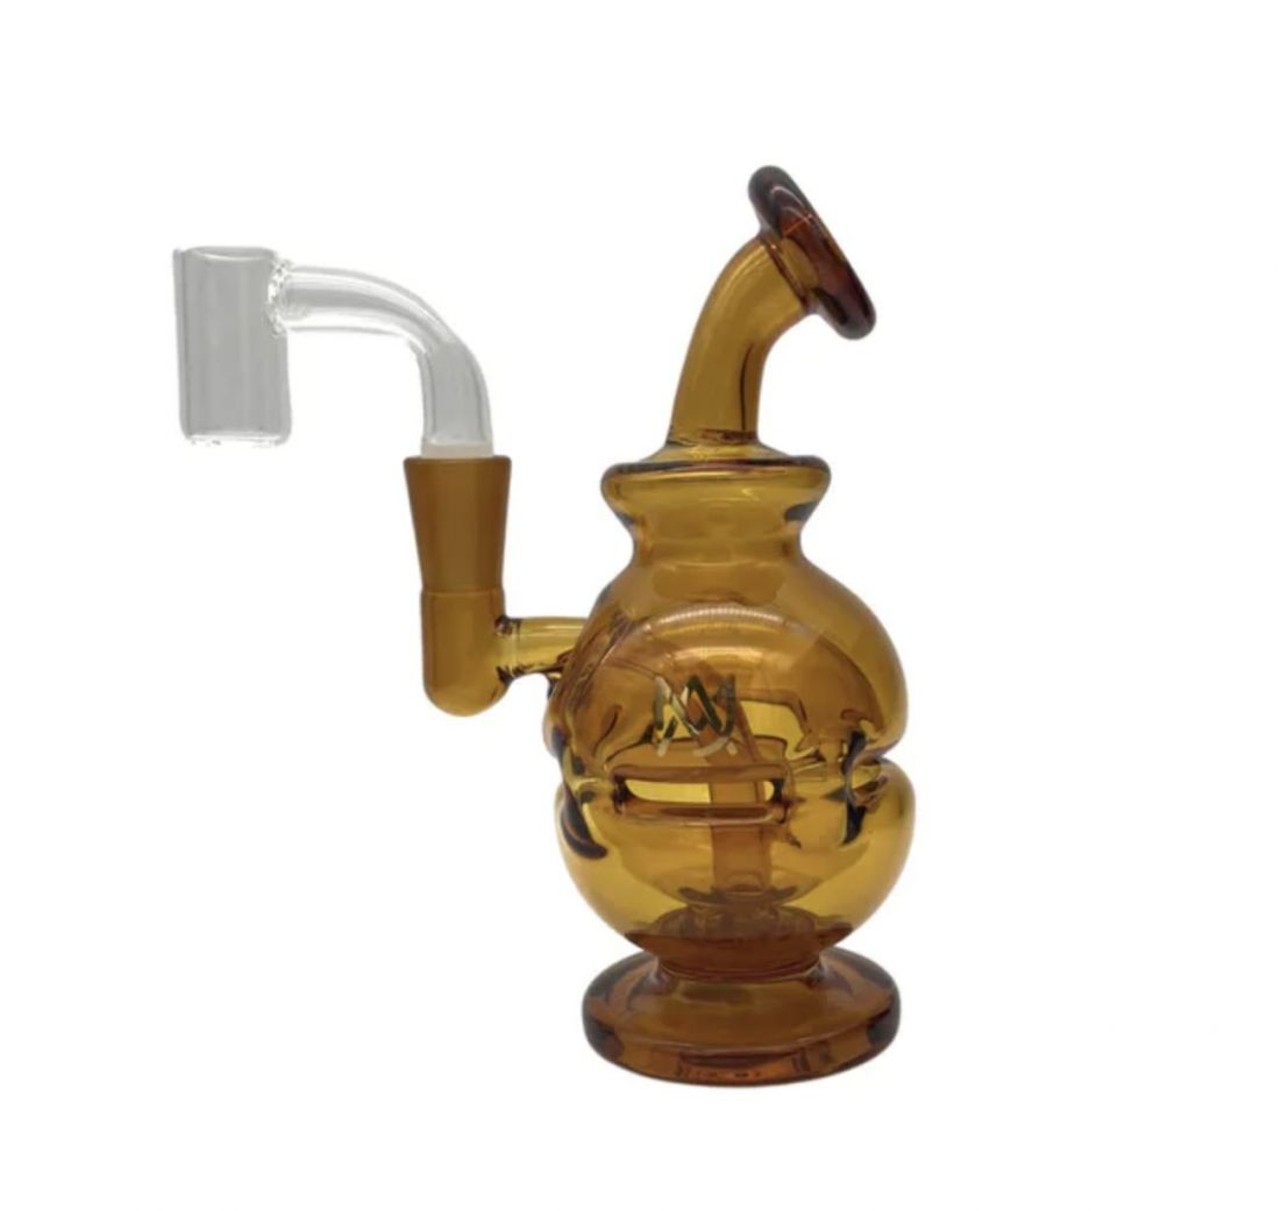 Dab rig
For the canna-sseur: 
MJ Arsenal Mini Dab Rig Royale in Amber, $69.99
LIV, 2625 Hilton Rd., Ste. 100, Ferndale; 248-420-4200;  livferndale.com
You're going to need a blowtorch. Wait, what? Though this may be more affordable than the electric rig for the amateurs, don&#146;t underestimate a classic glass rig, because it requires some skill to use and several steps before you can transcend your earthly body. Canna-sseurs love this mini dab rig. Wait a minute, Metro Times. We're canna-sseurs, we can handle full-size dab rigs, you might be thinking. Well, we're sure you can, but this mini rig by MJ Arsenal claims to showcase maximum wax/concentrate flavor because a smaller rig means less air, which means big flavor. See? That's what real canna-sseurs care about. 
Photo via Weedmaps